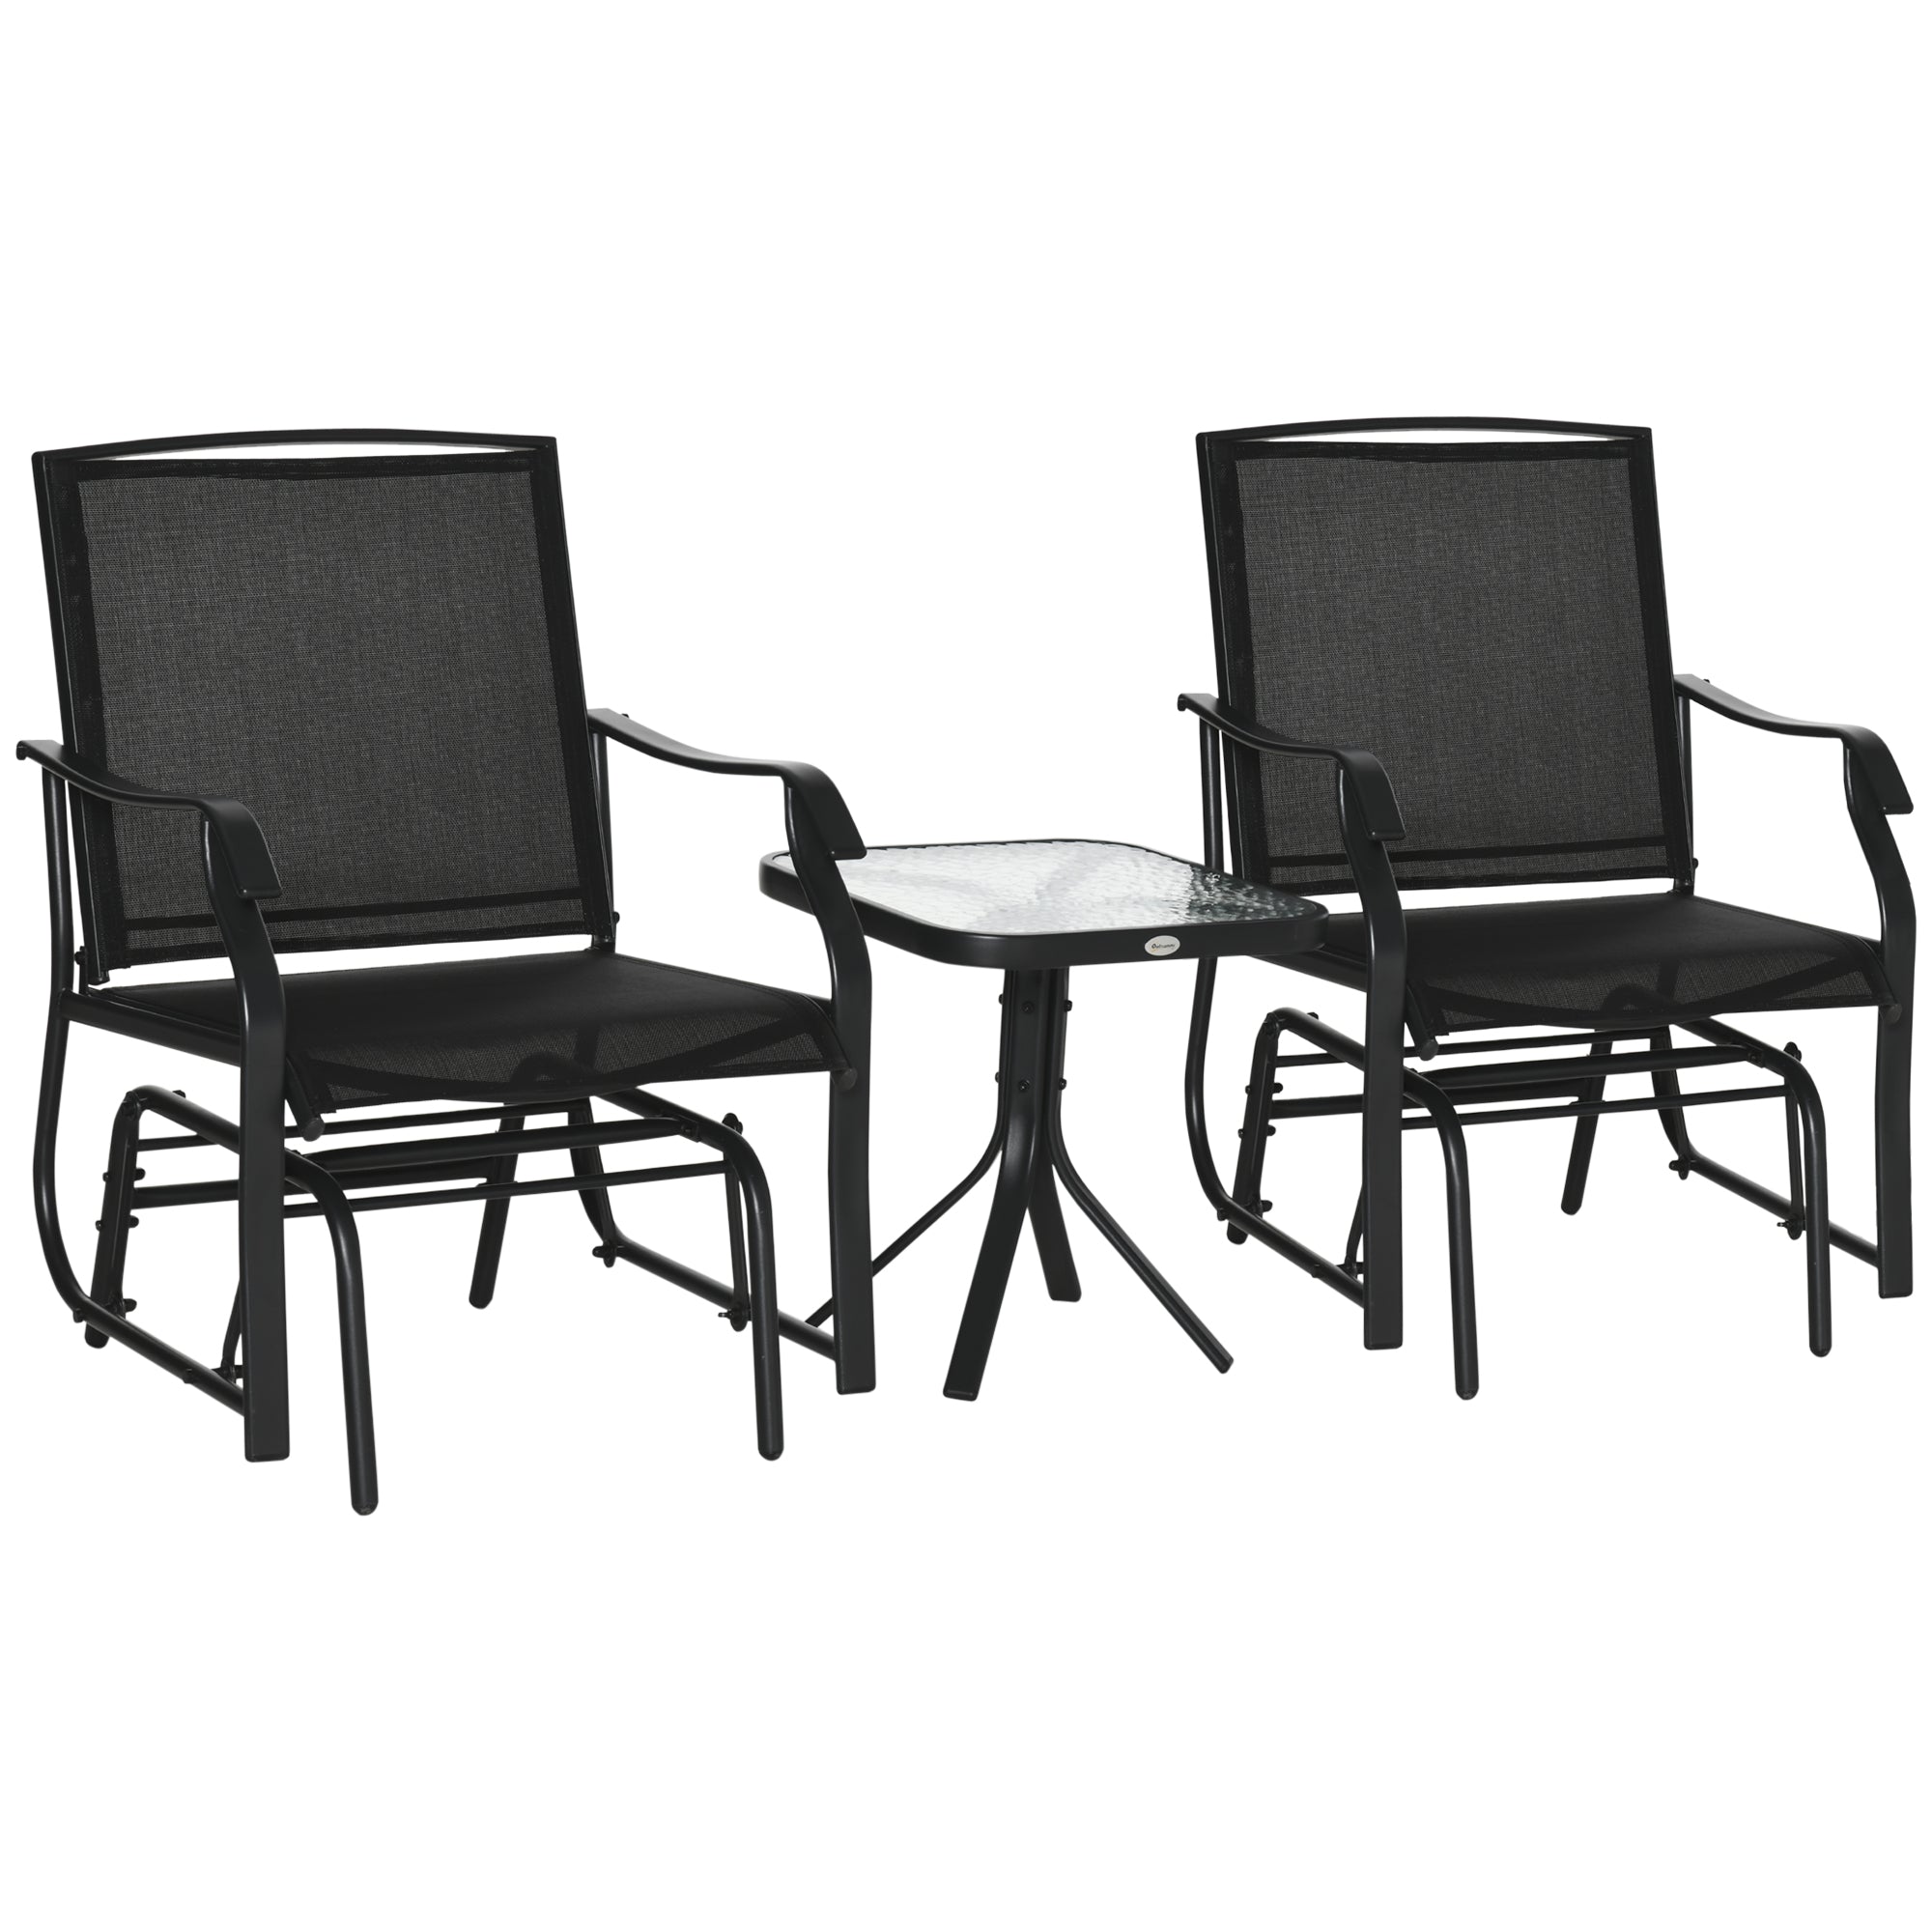 Outsunny 3 PCS Outdoor Sling Fabric Rocking Glider Chair w/ Table Set Black  | TJ Hughes